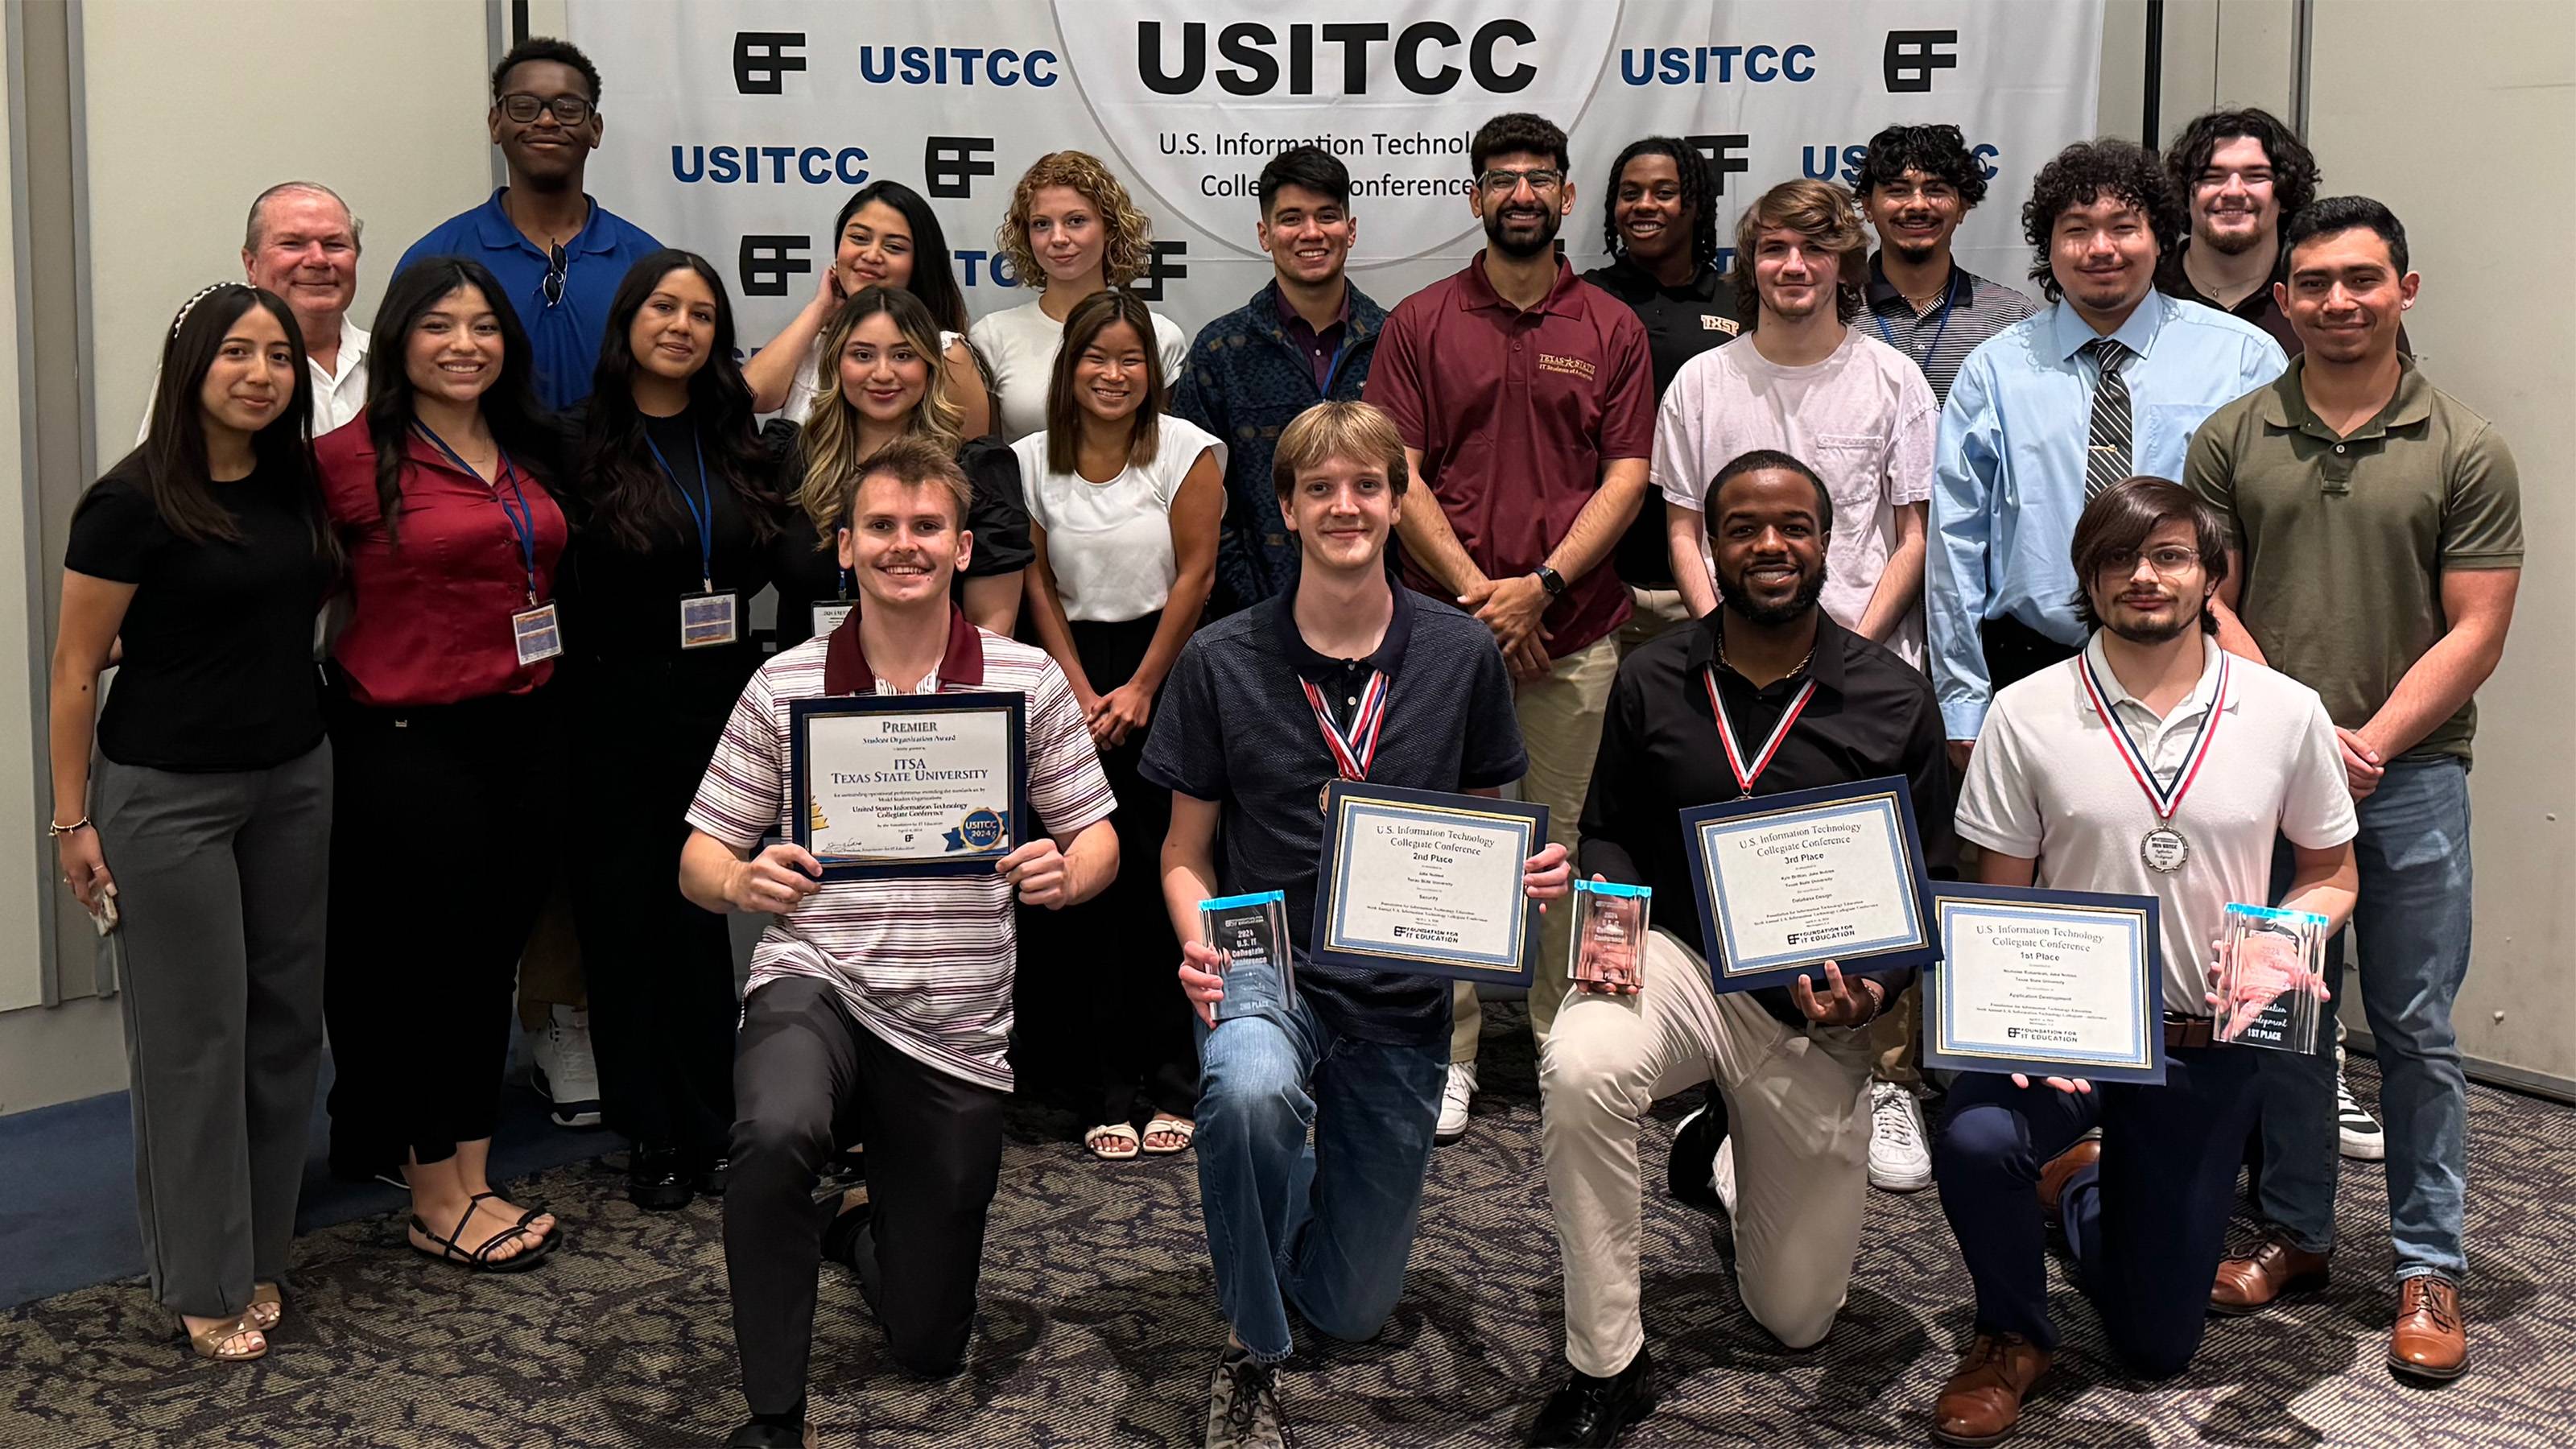 College students posing with awards at U.S.I.T.C.C. Conference